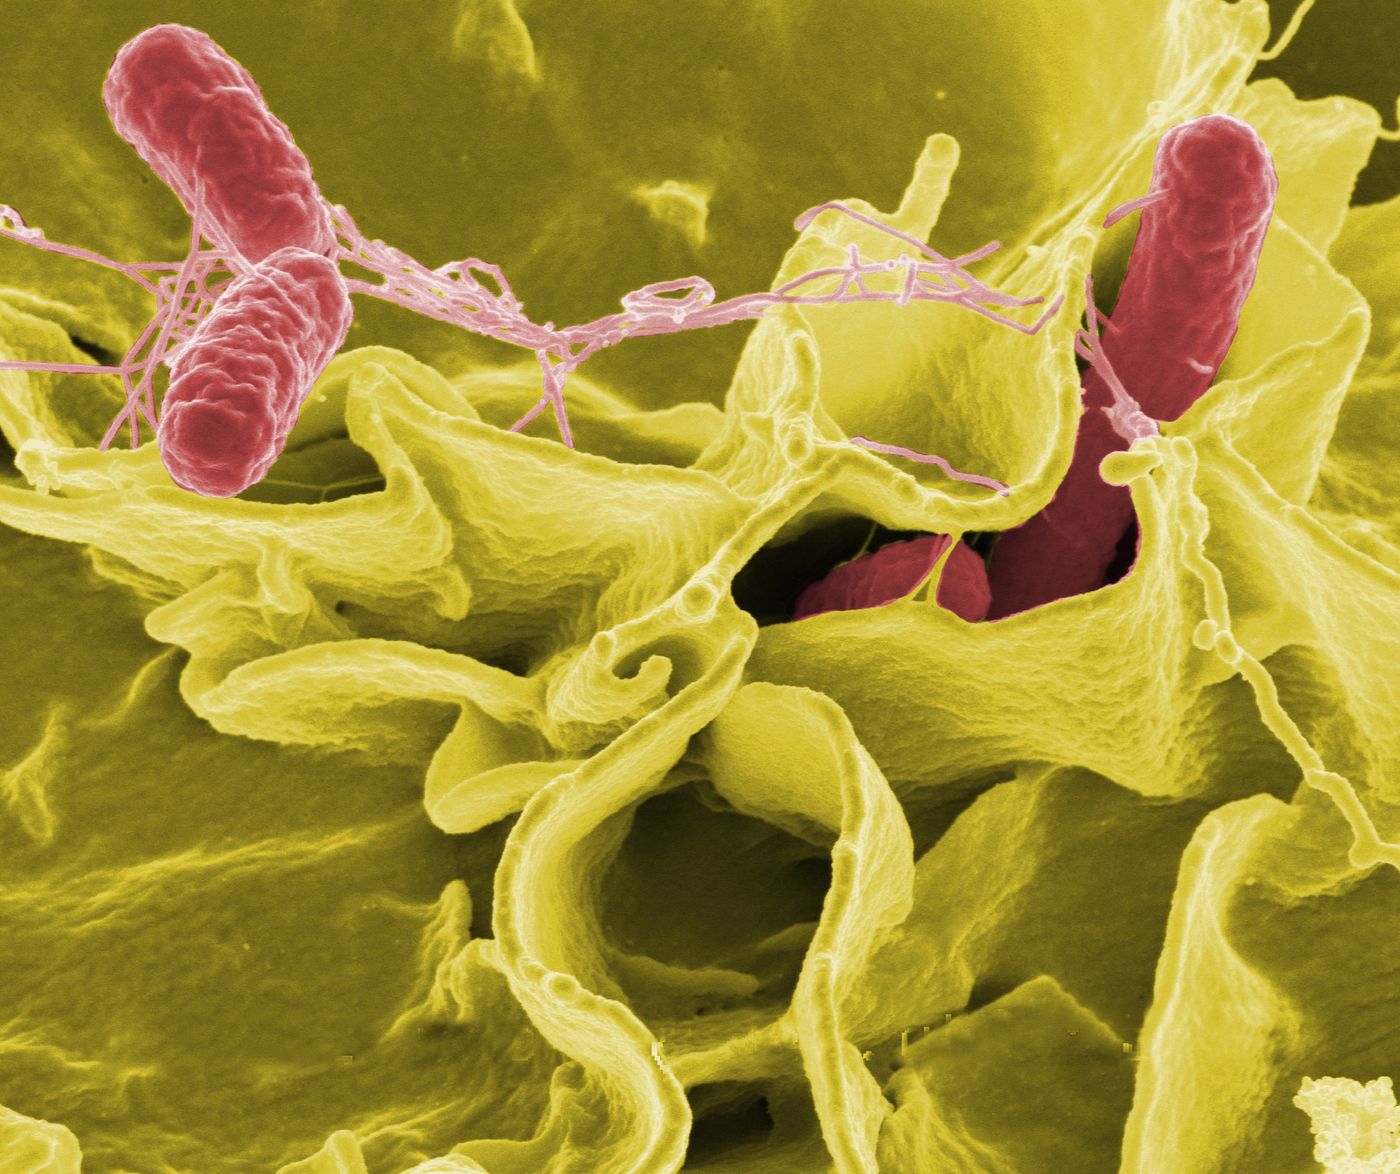 Color-enhanced scanning electron micrograph showing Salmonella Typhimurium (red) invading cultured human cells./ Credit: Rocky Mountain Laboratories, NIAID, NIH